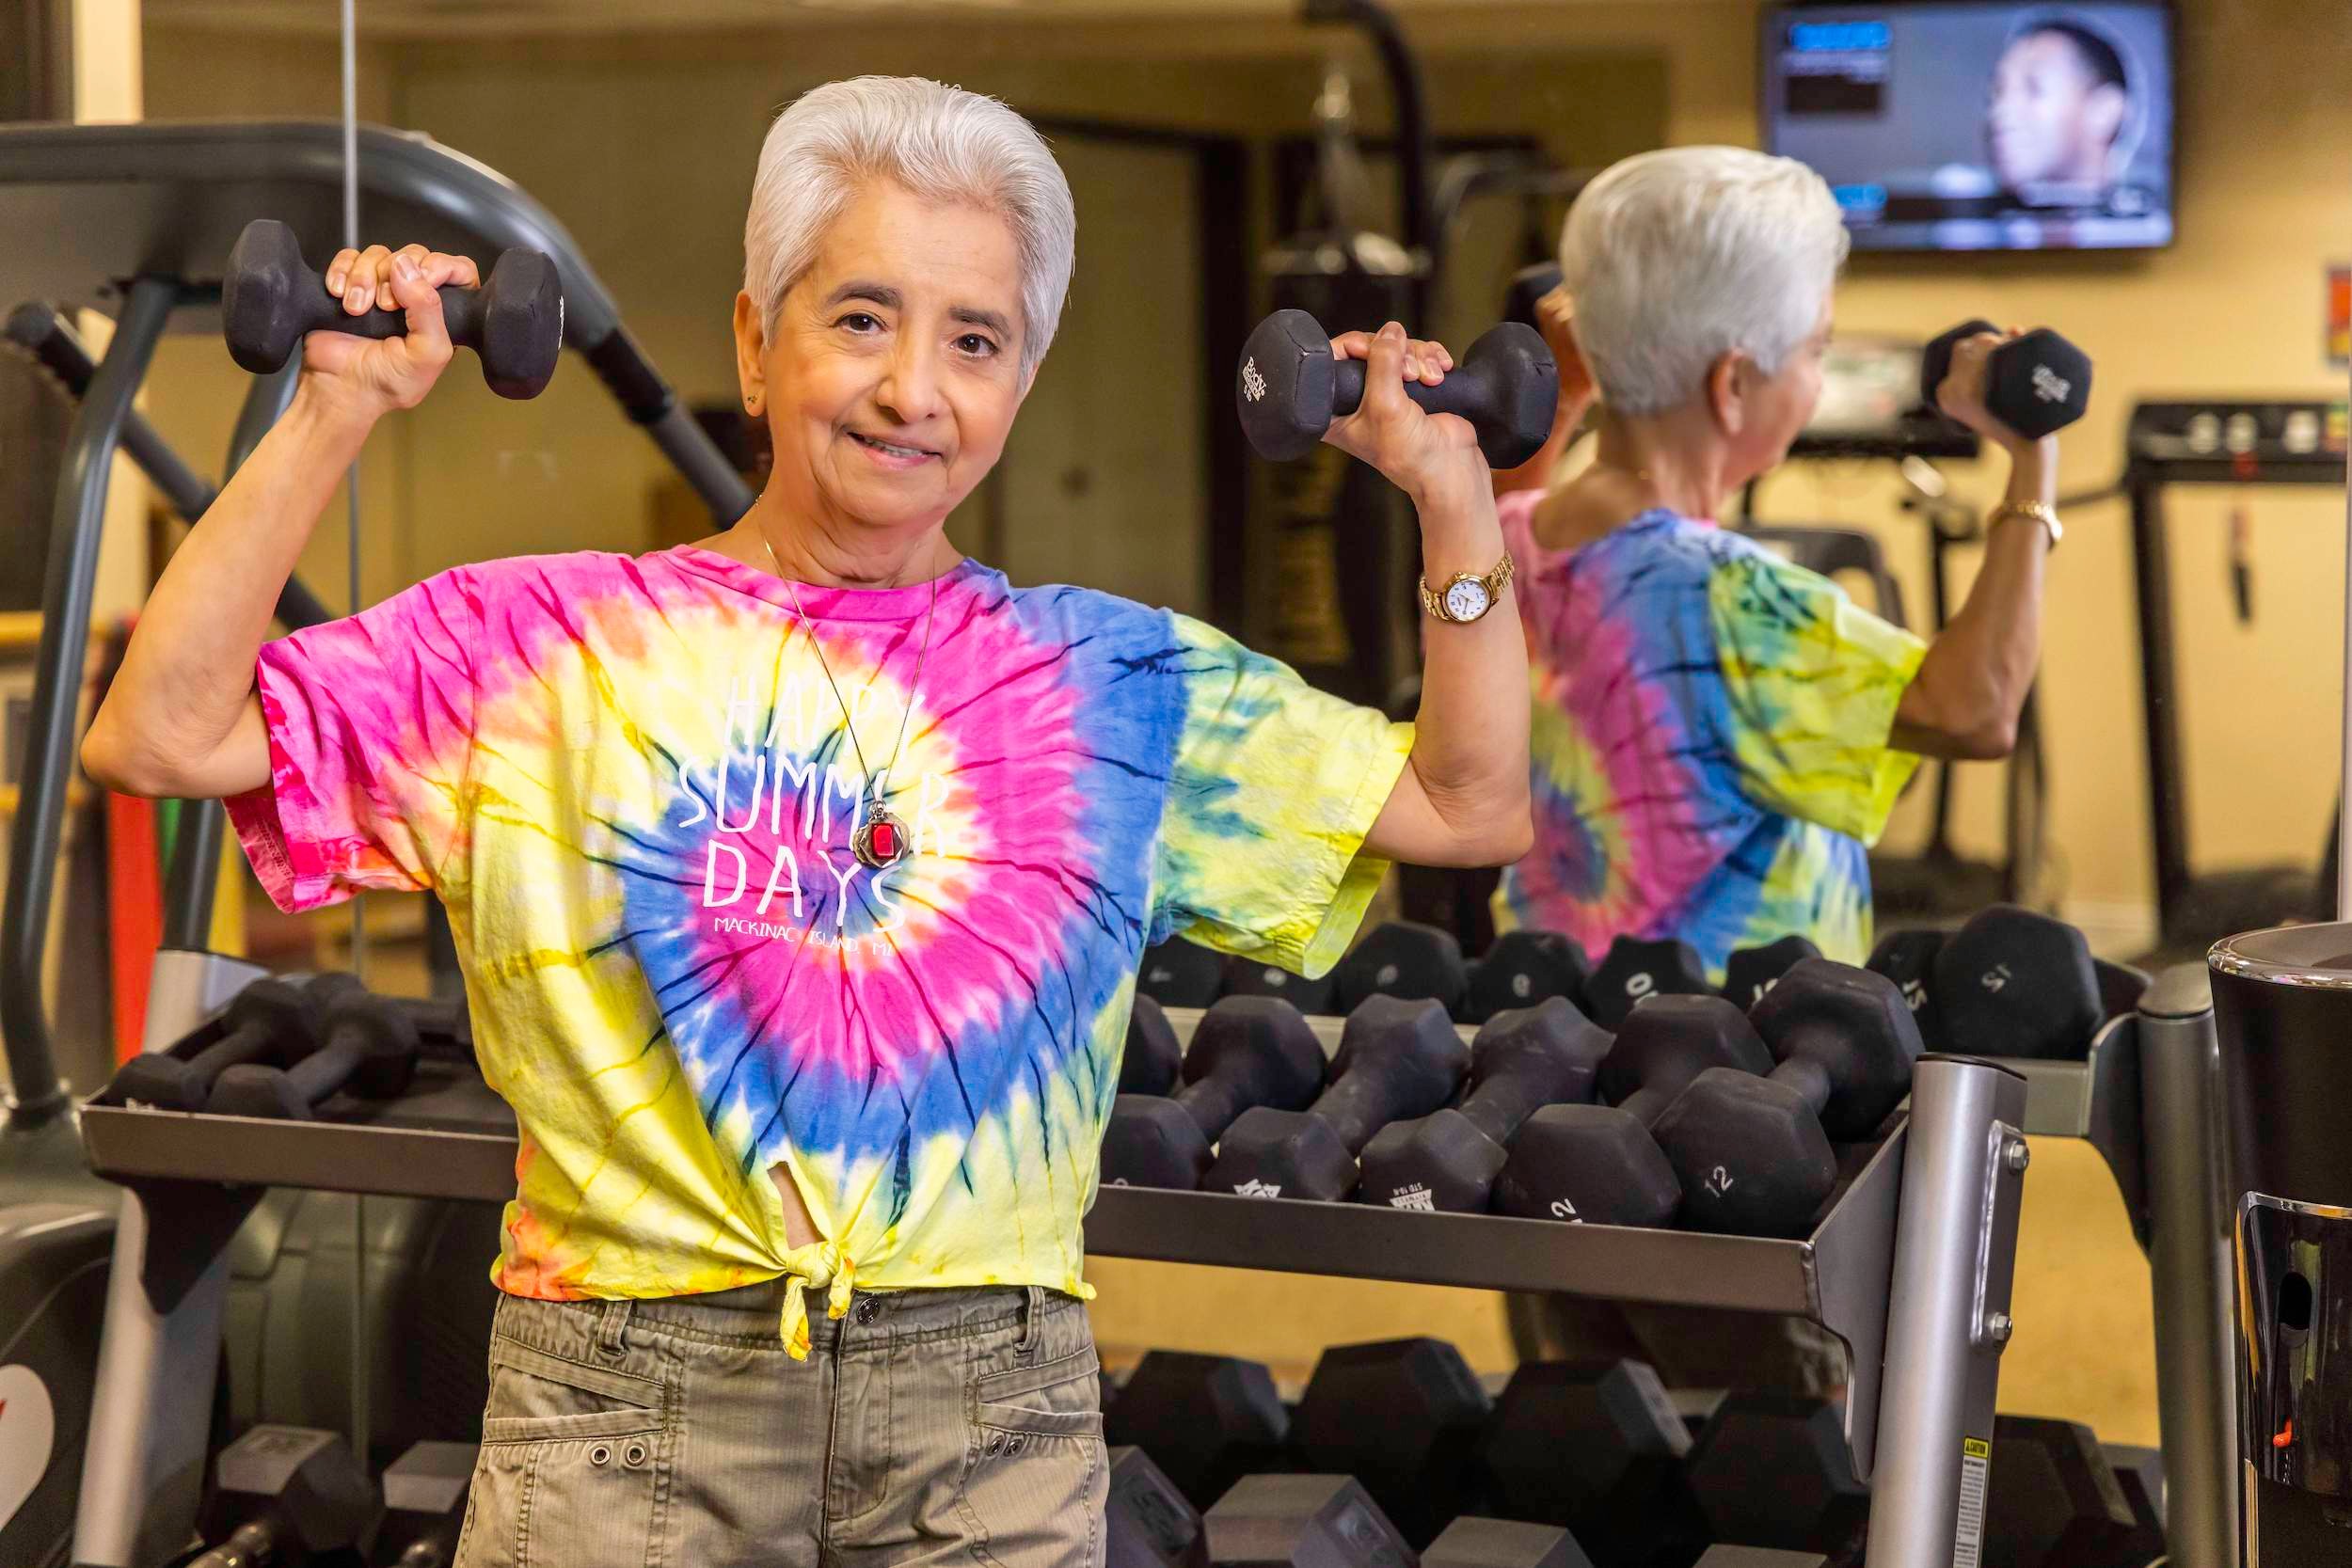 woman in tie dye shirt working out